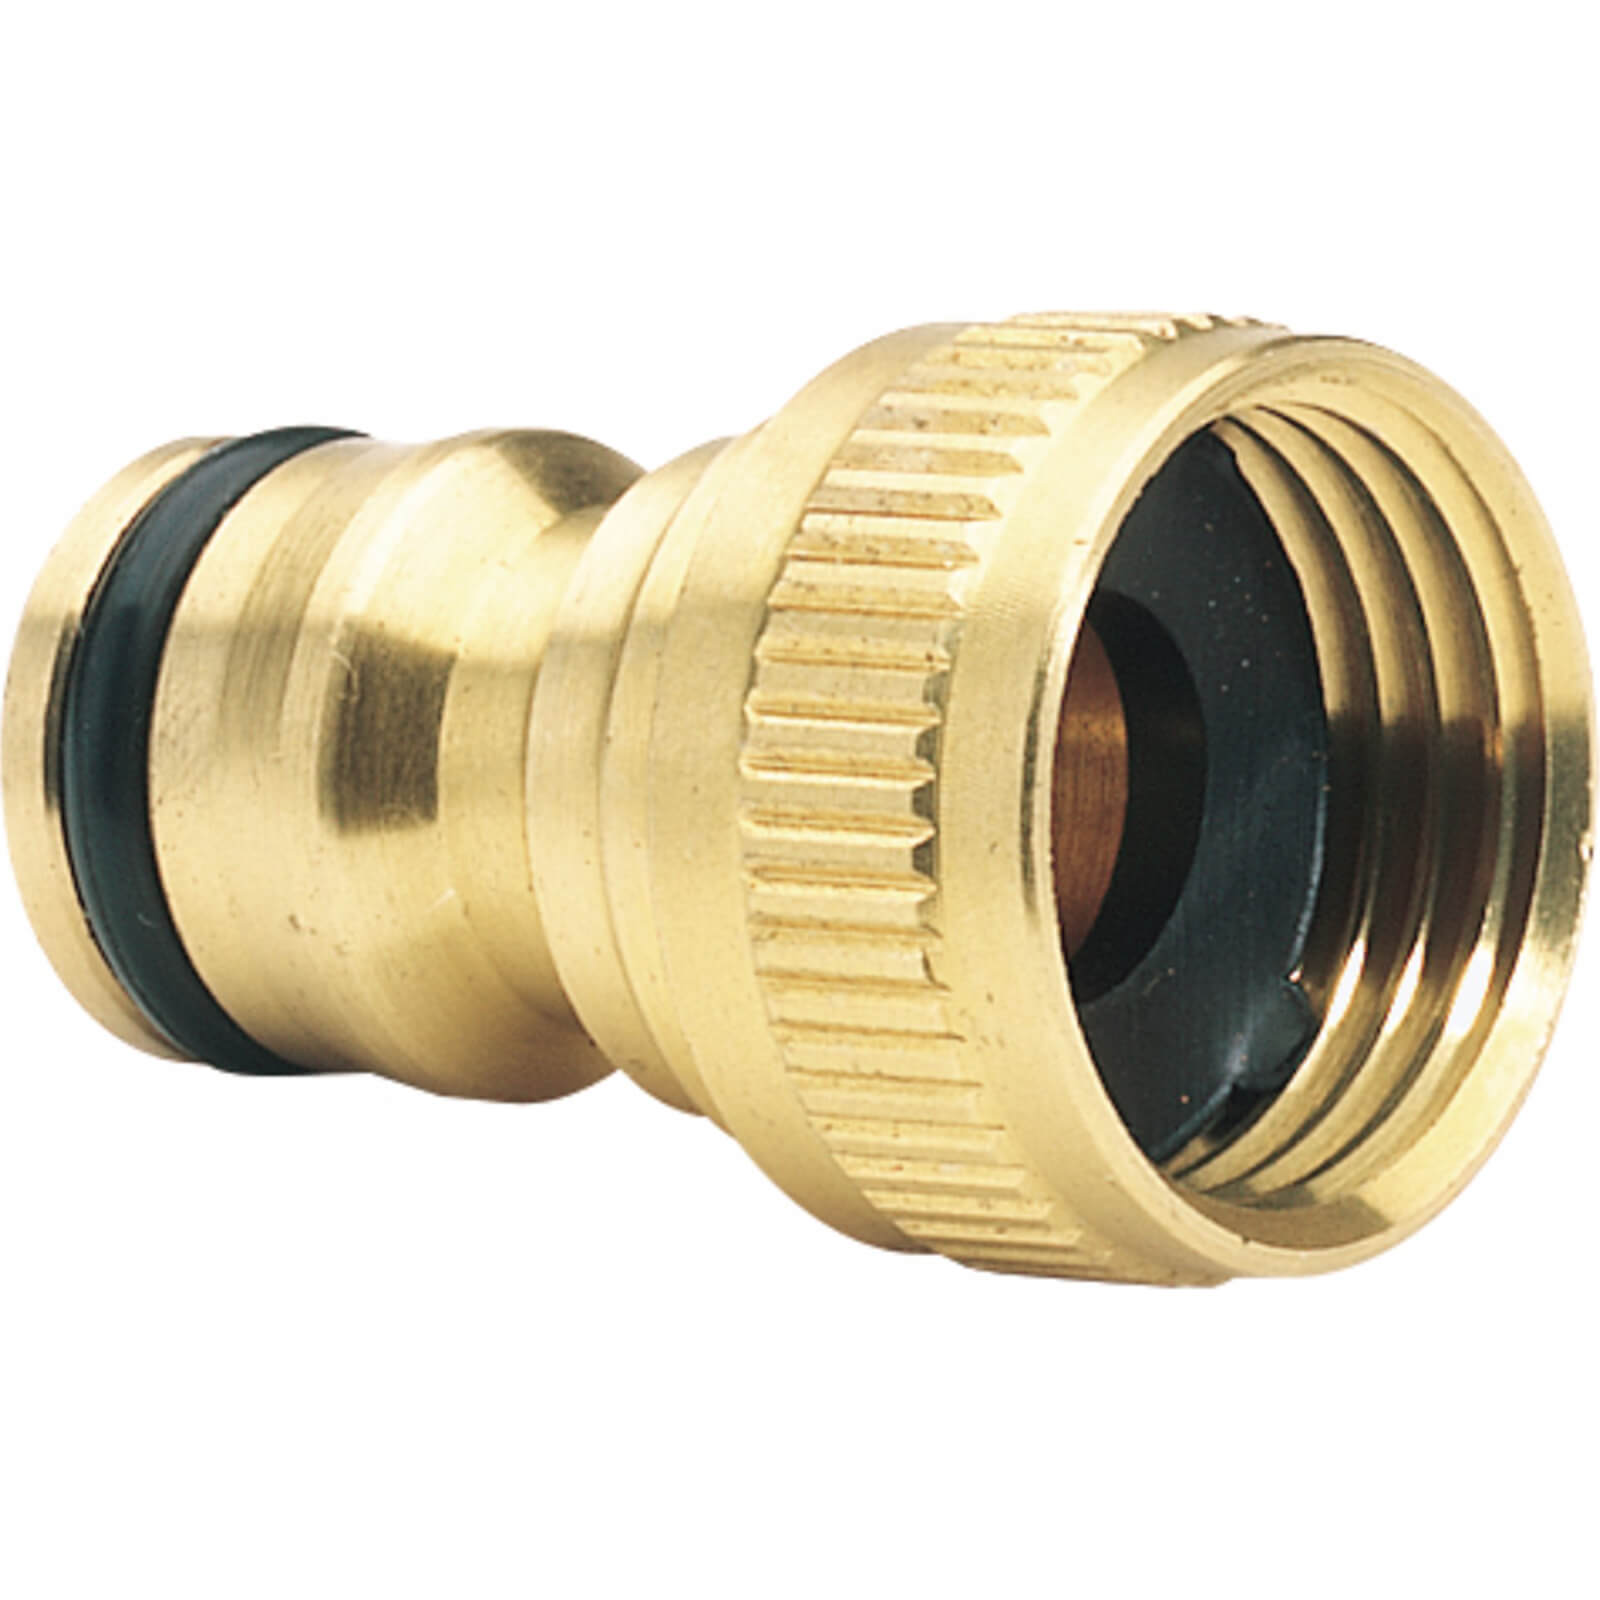 Image of Draper Expert Brass Hose Pipe Tap Connector 1/2" / 12.5mm Pack of 1